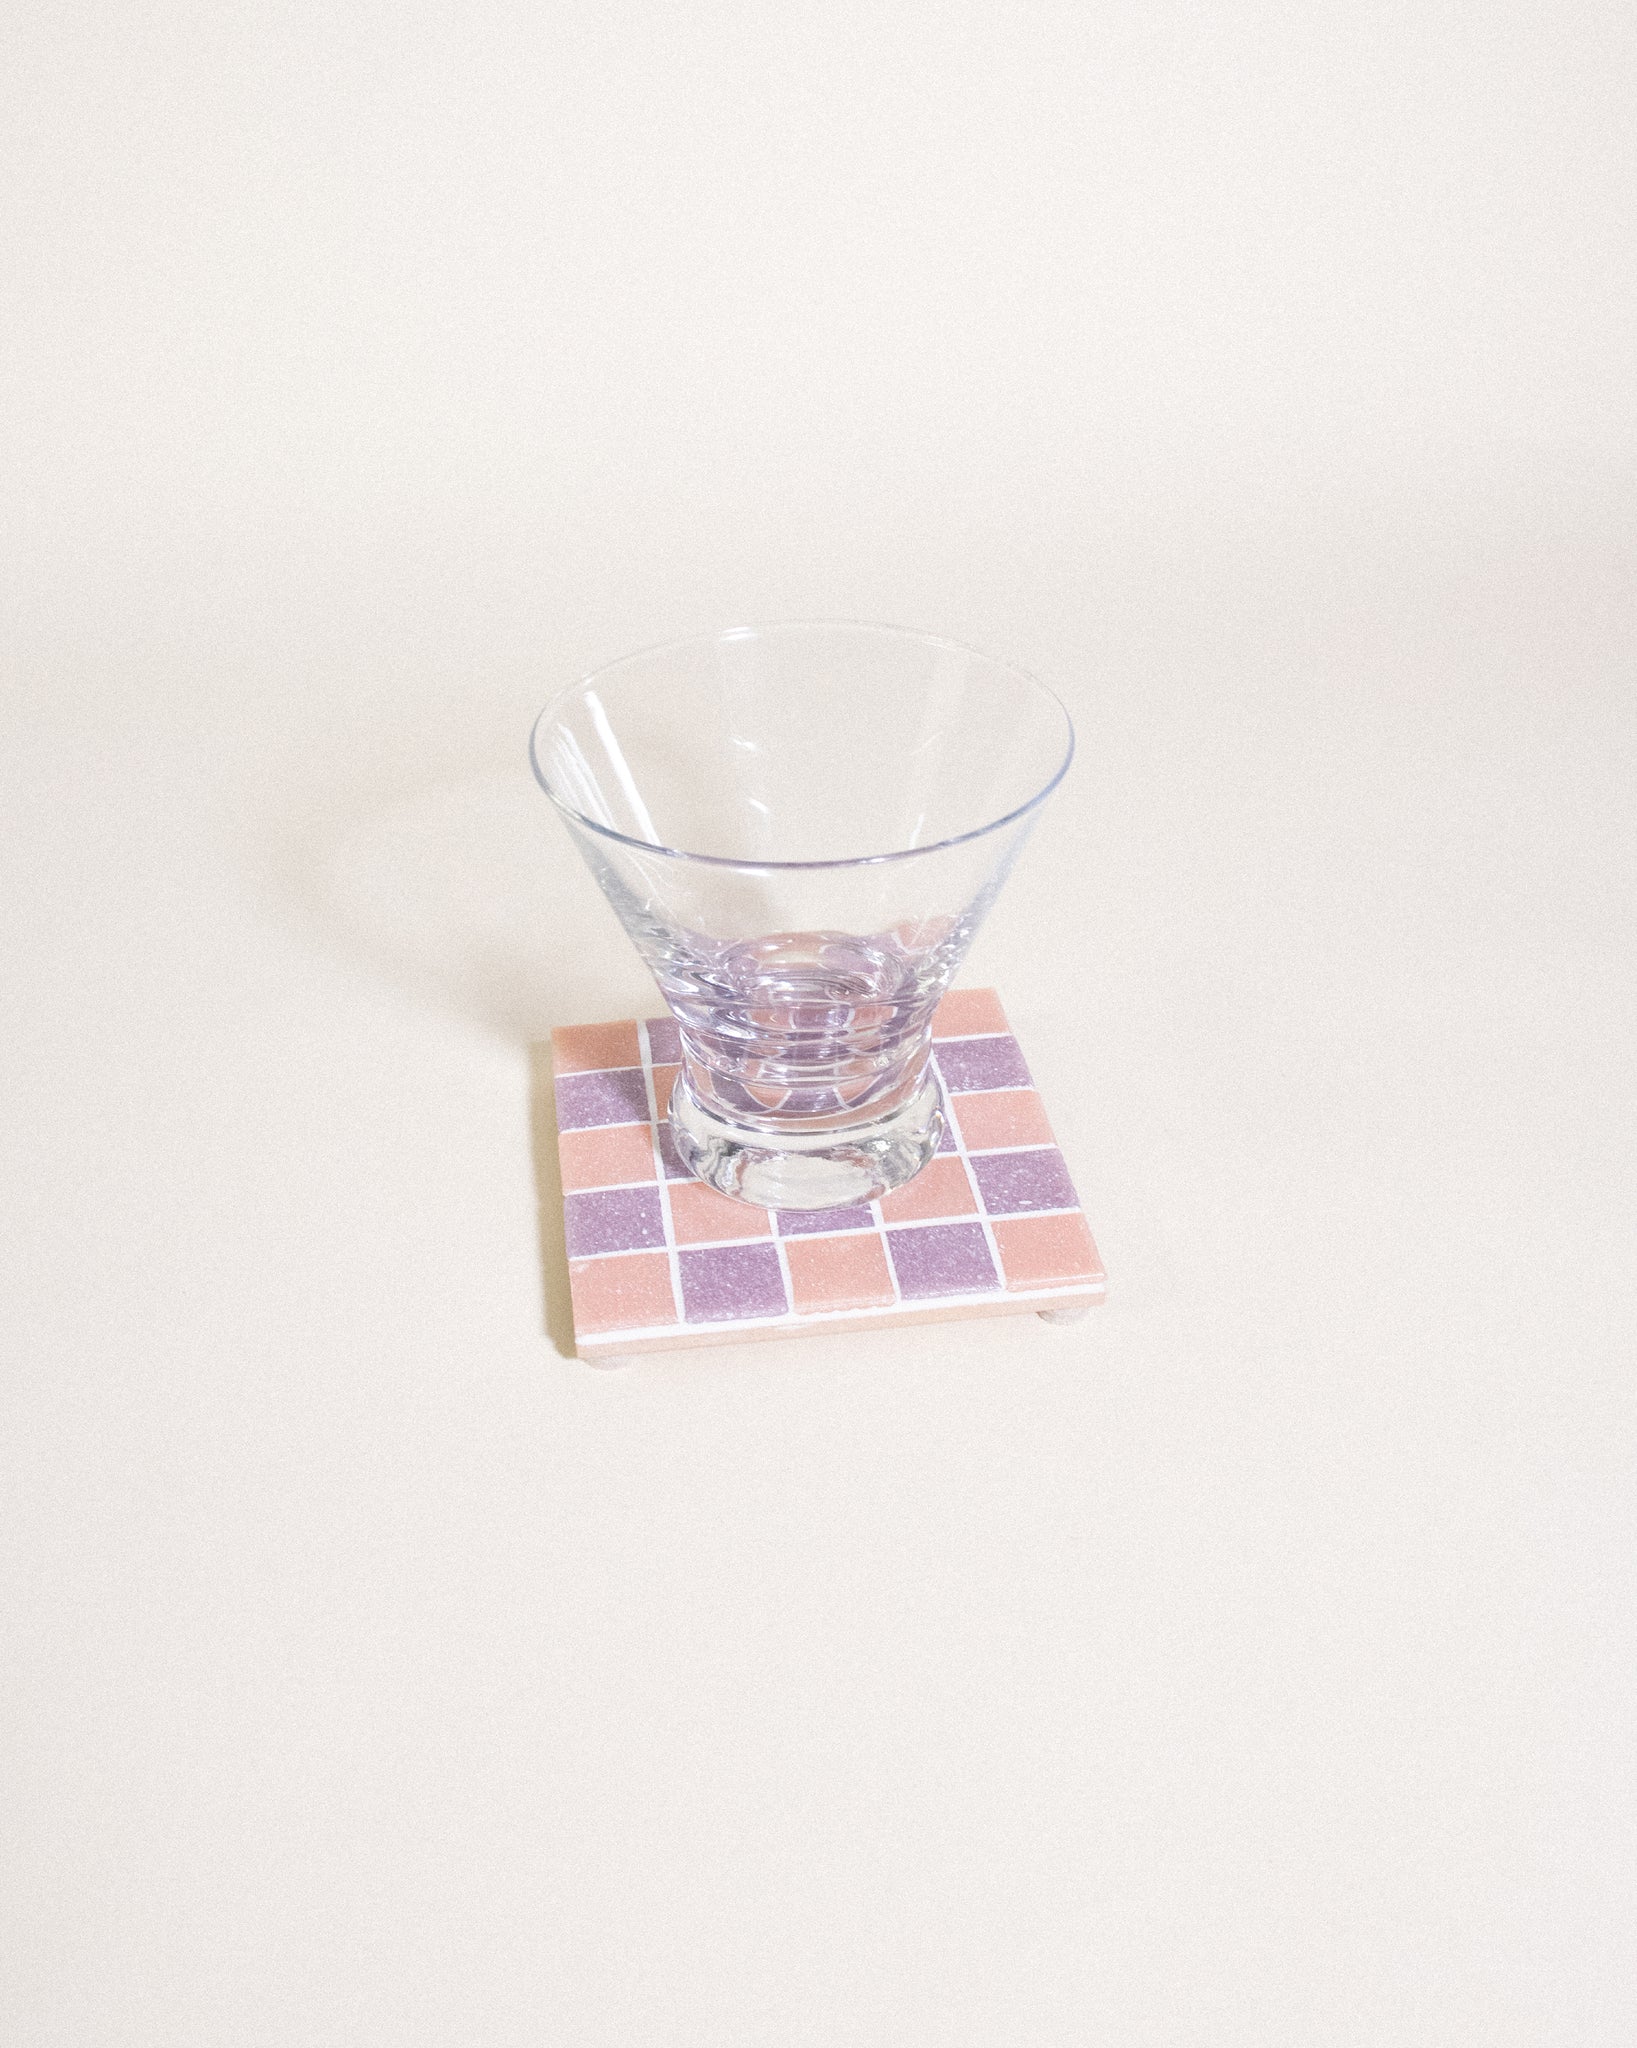 GLASS TILE COASTER - Sour Patch Candy - 06